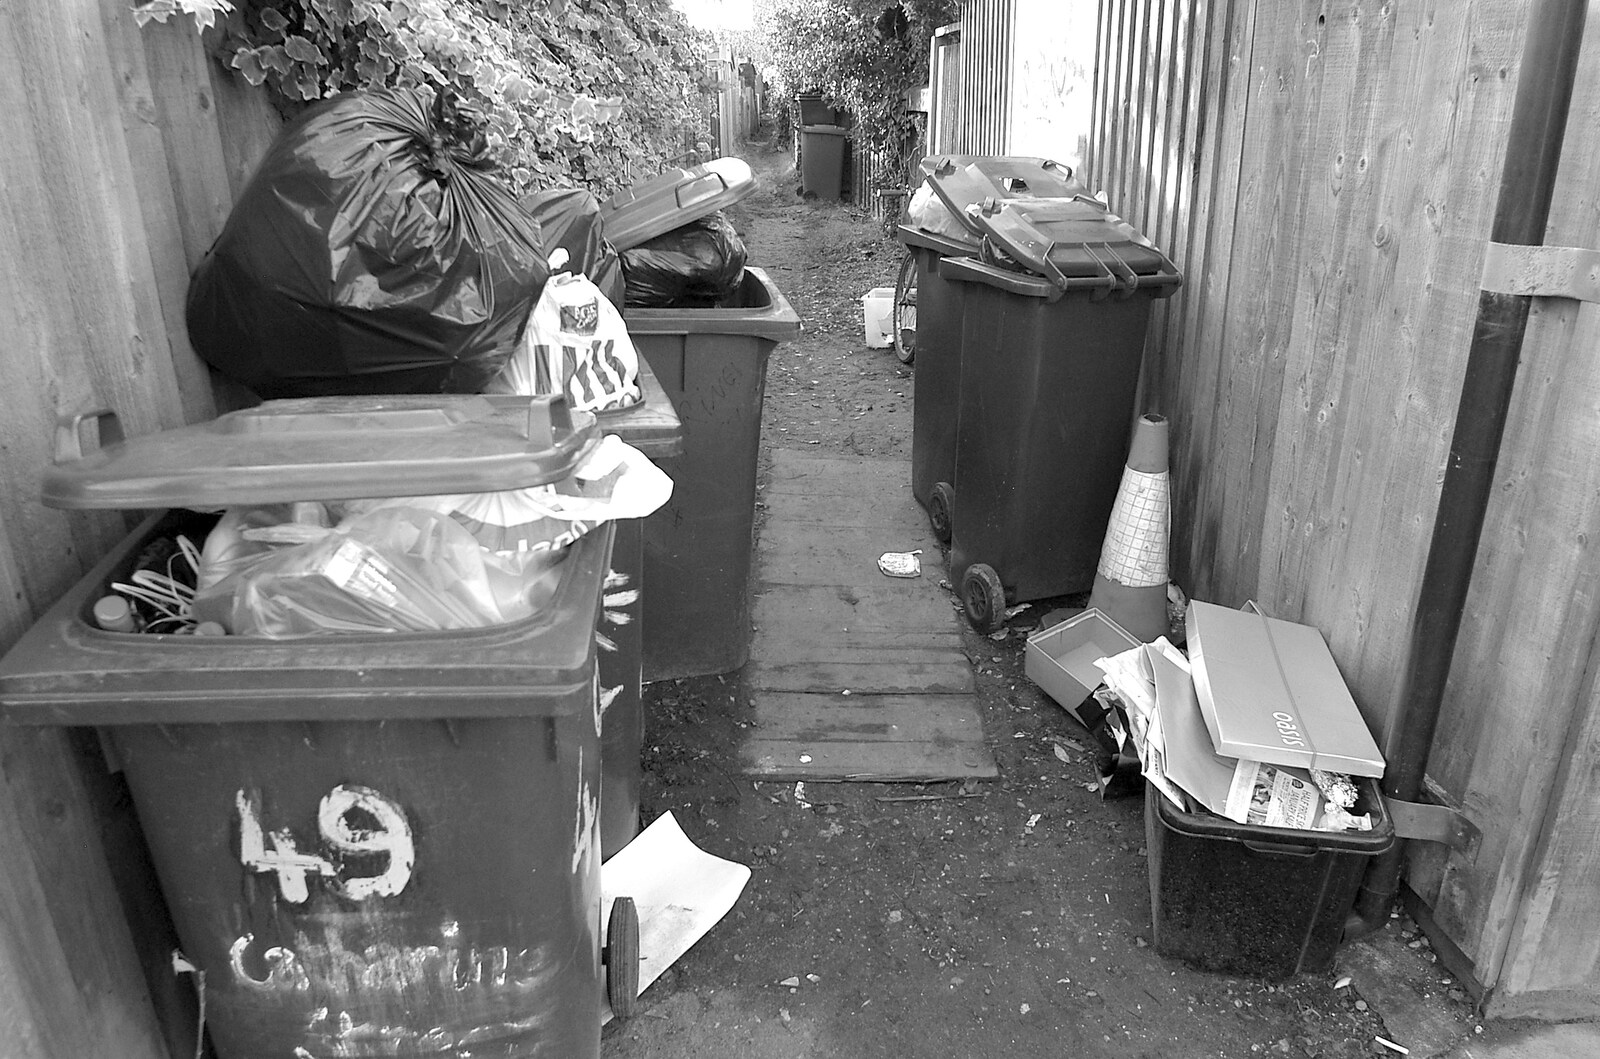 Cambridge's back streets are all wheelie bins from Cambridge Bins and Little Chef Dereliction, Kentford, Suffolk - 21st January 2006